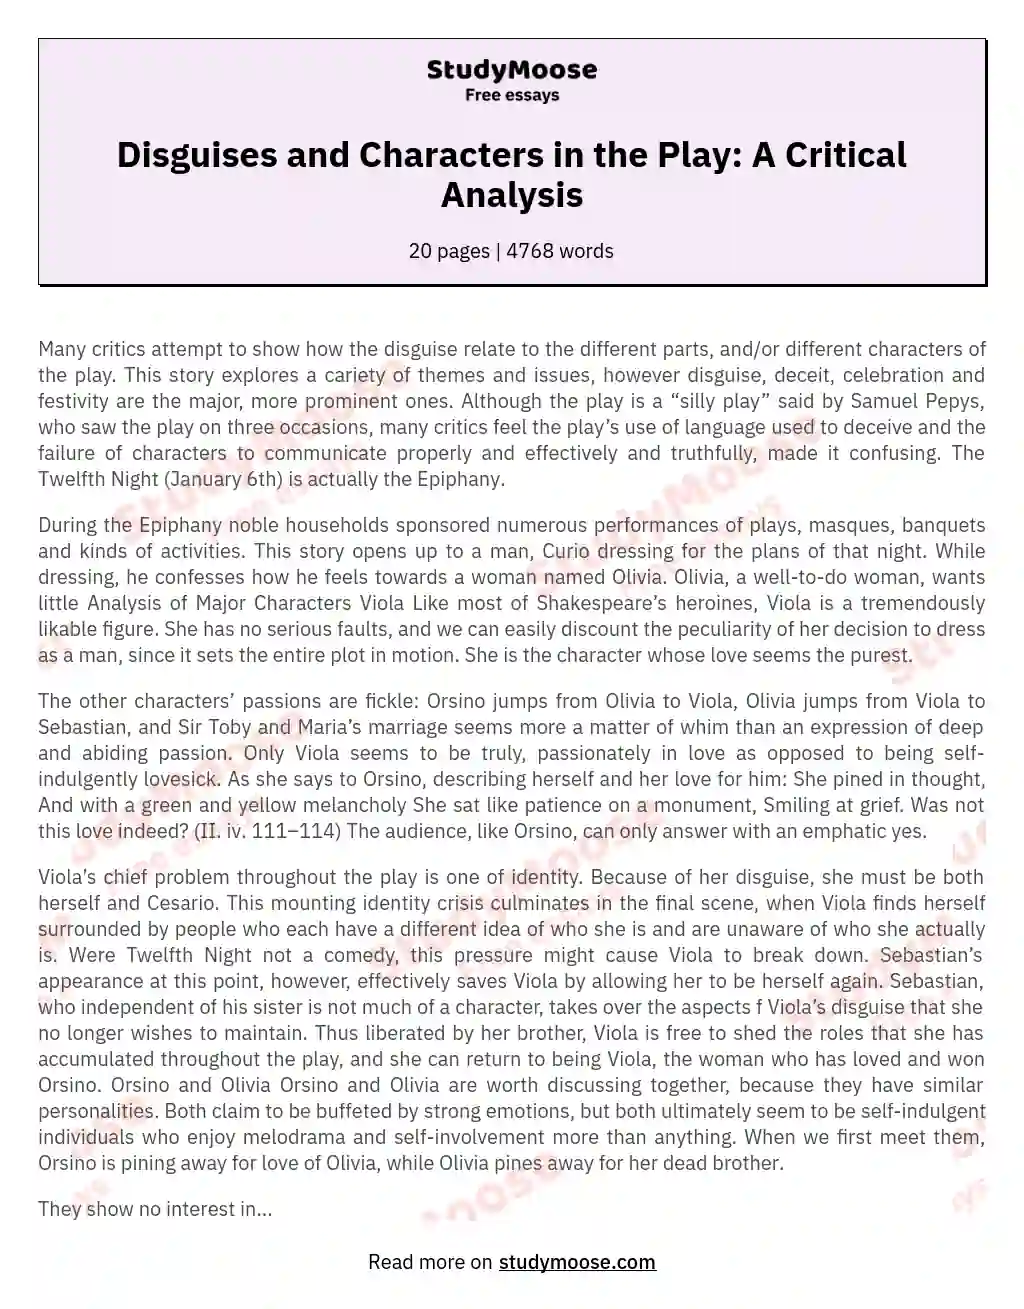 Disguises and Characters in the Play: A Critical Analysis essay